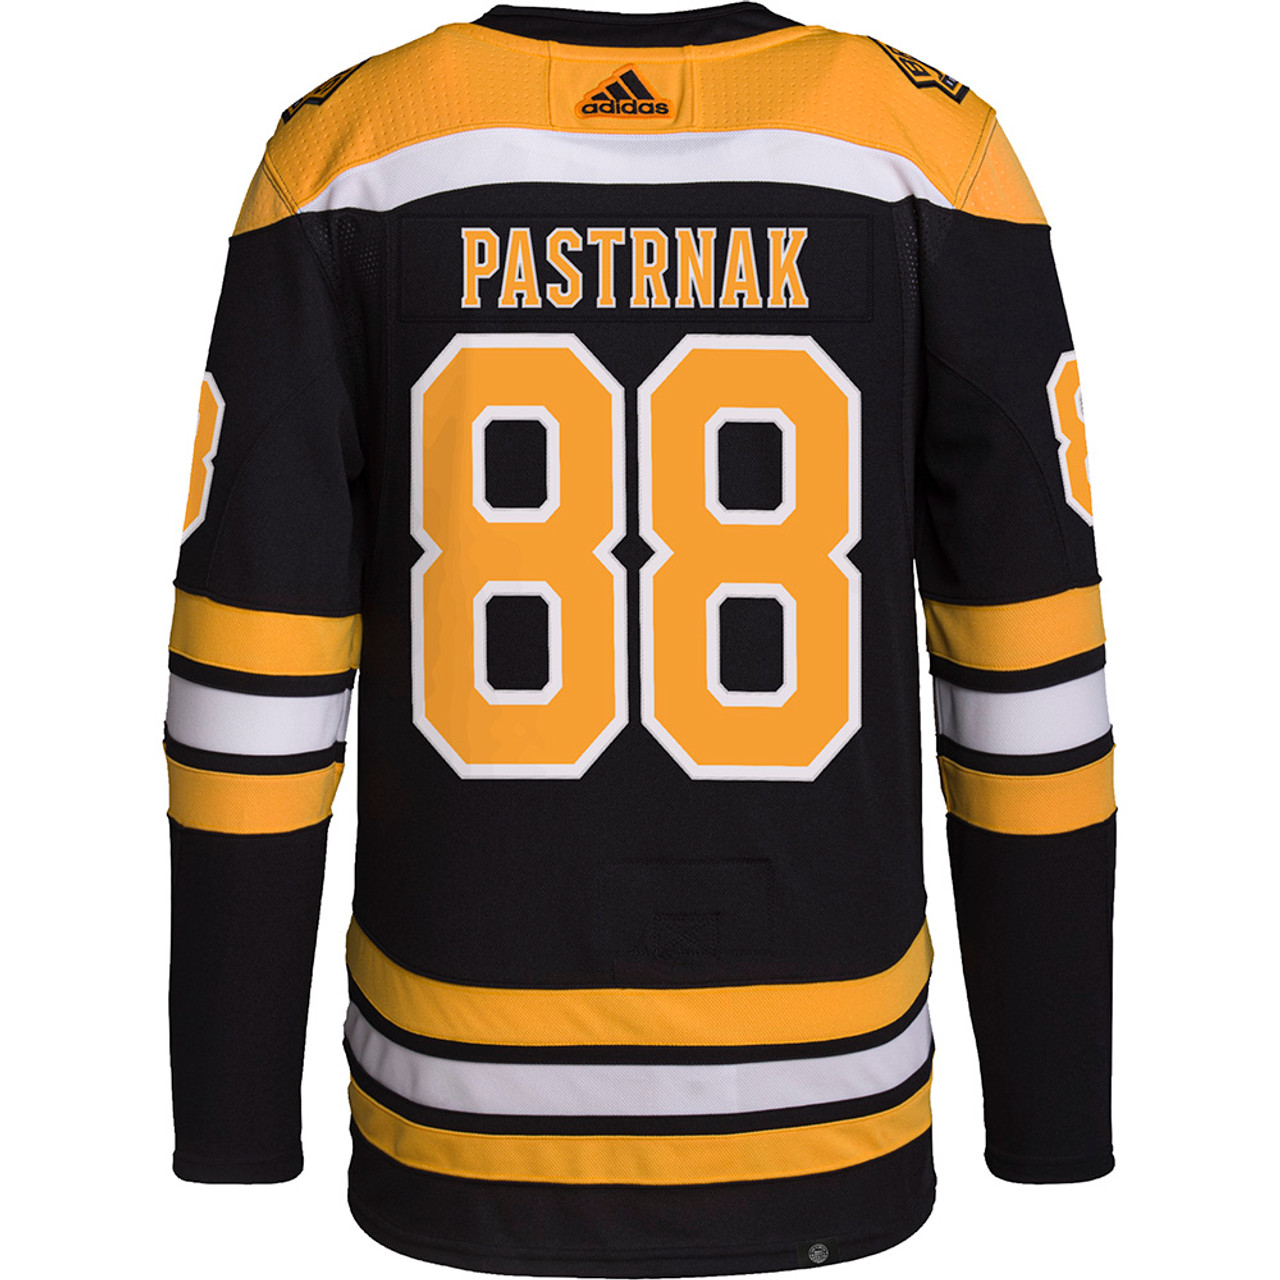 Bruins Adidas Authentic Pro Third Jersey